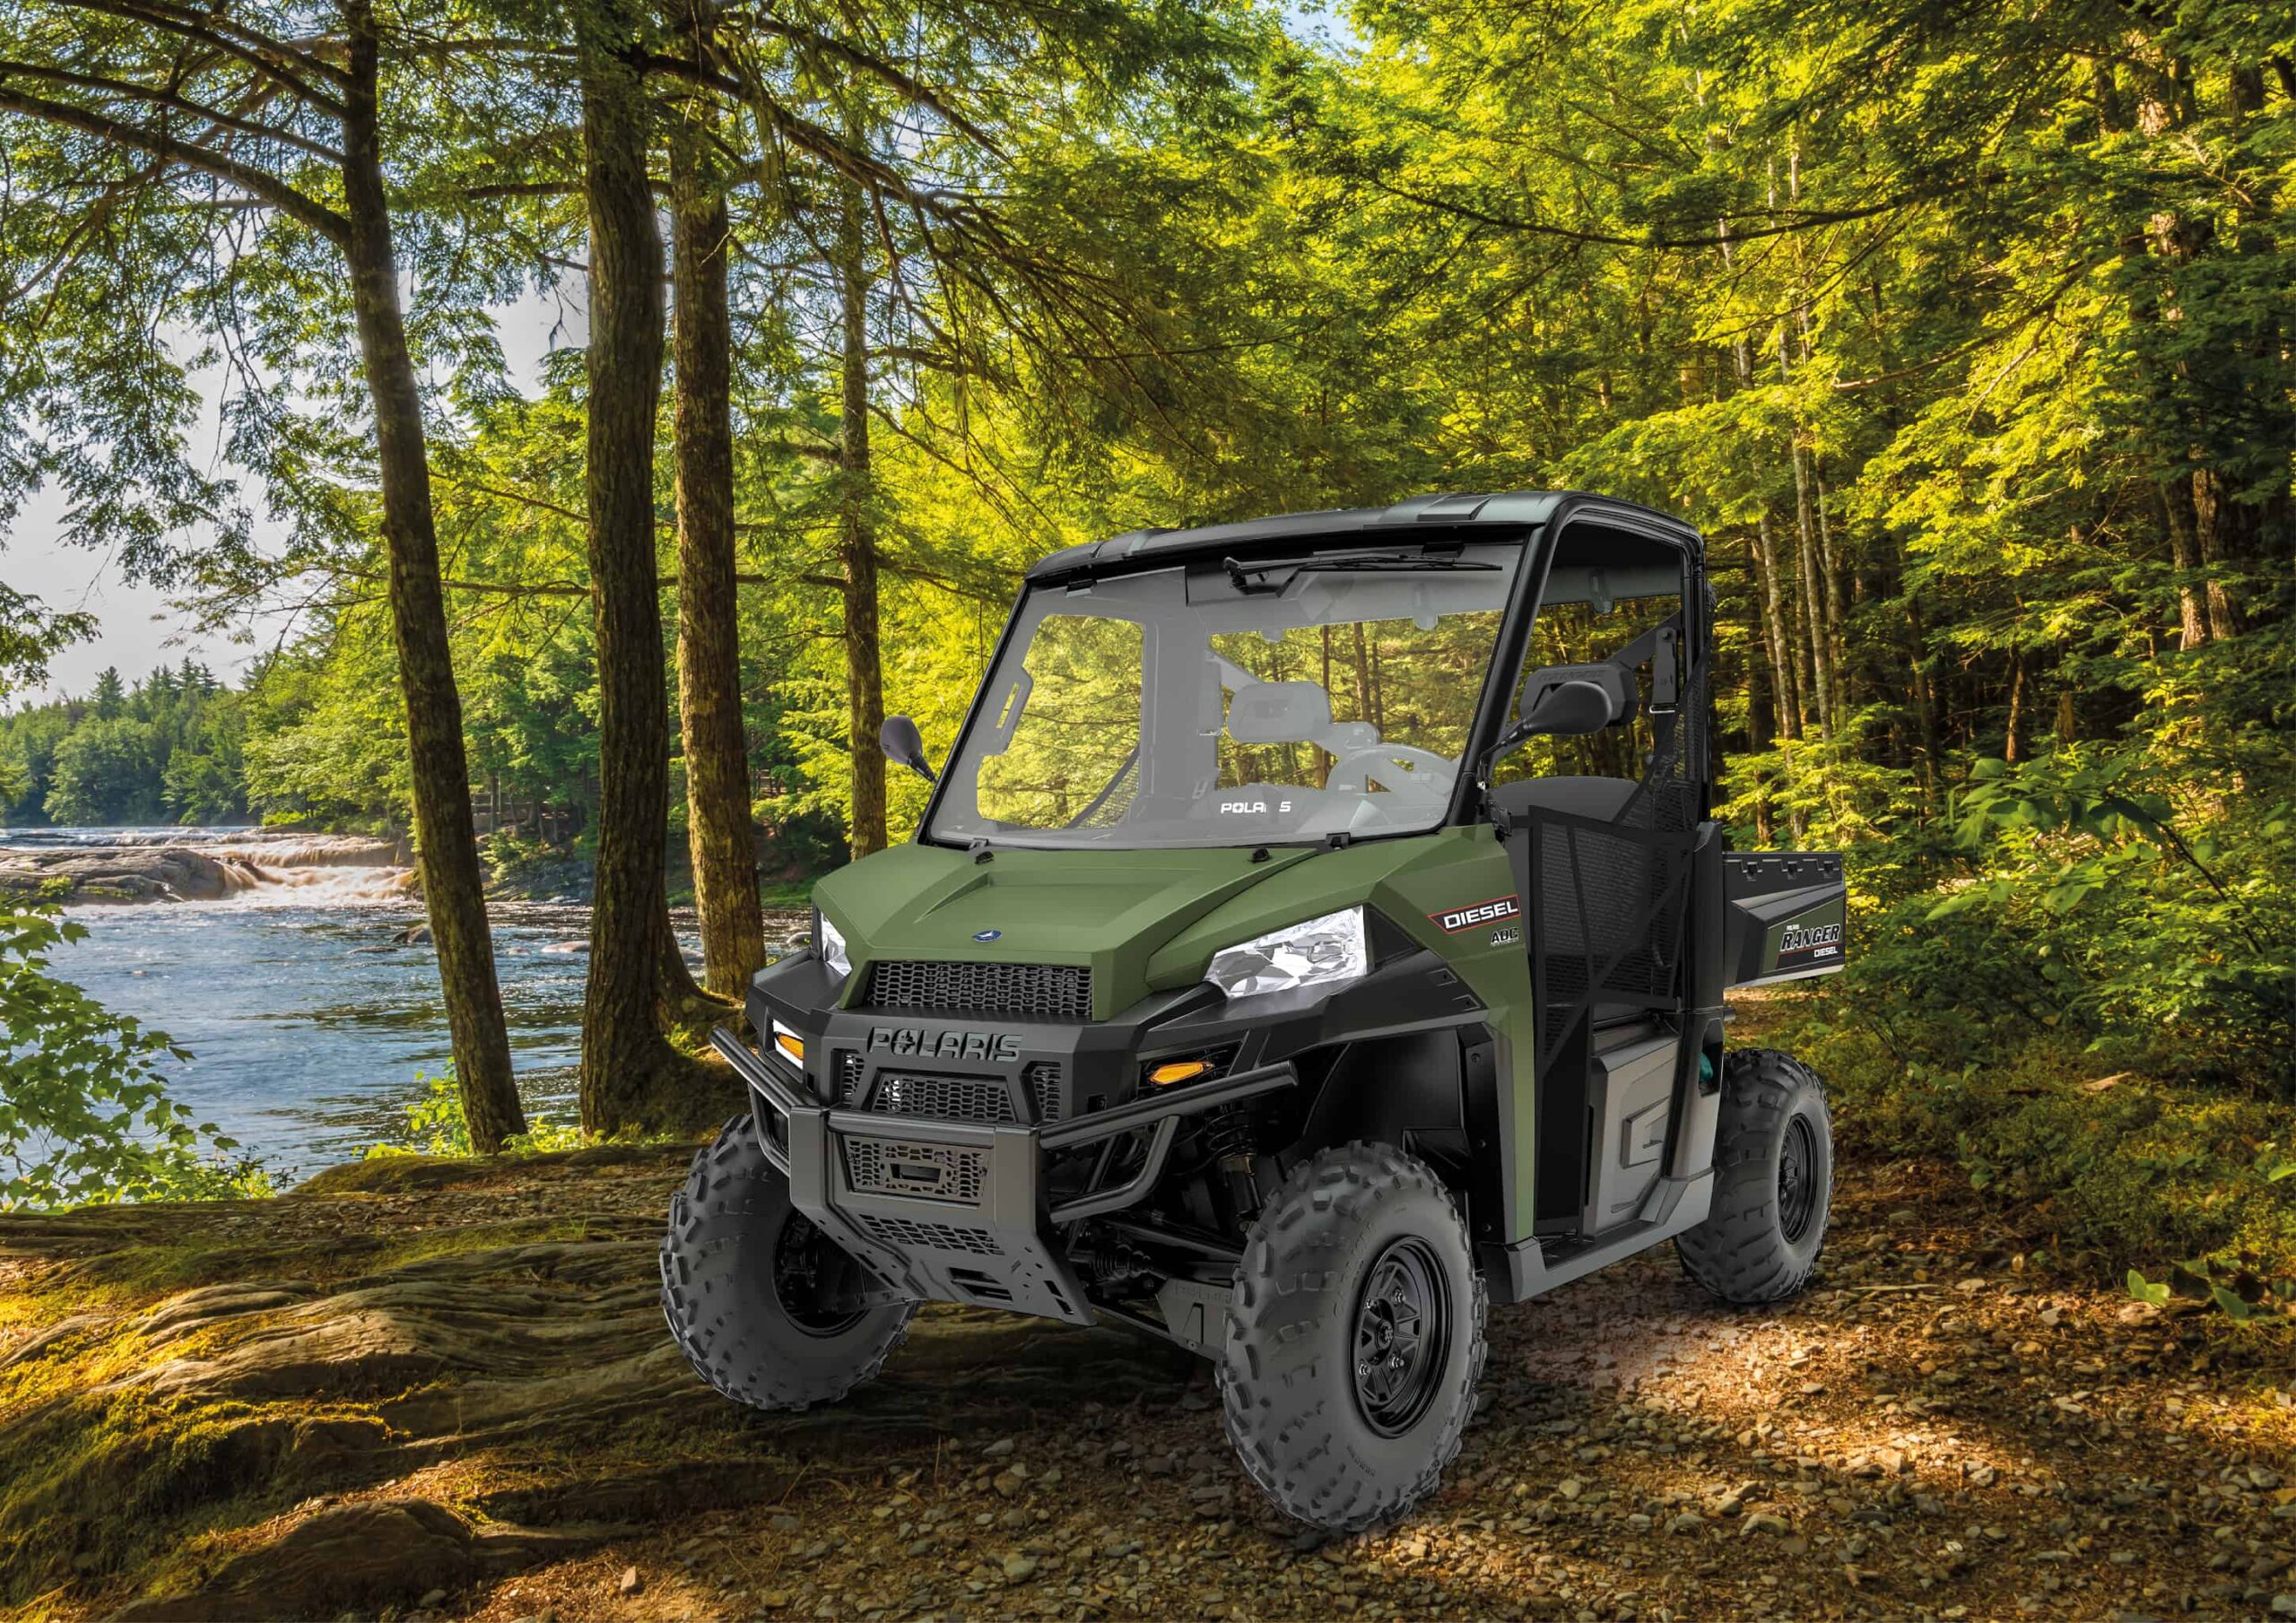 Polaris Ranger Diesel now available from just £11,999